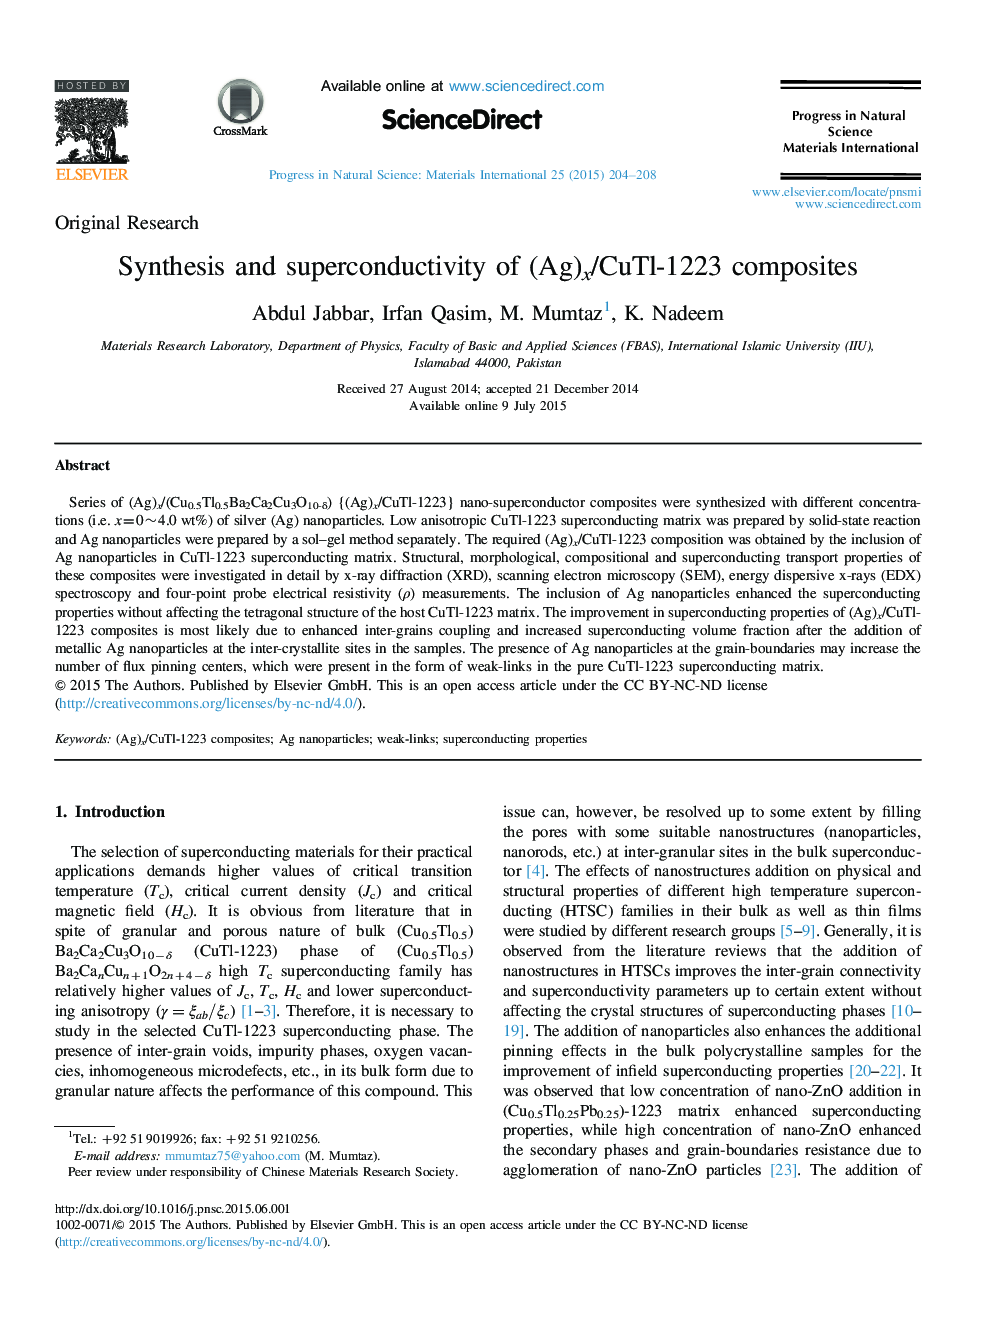 Synthesis and superconductivity of (Ag)x/CuTl-1223 composites 